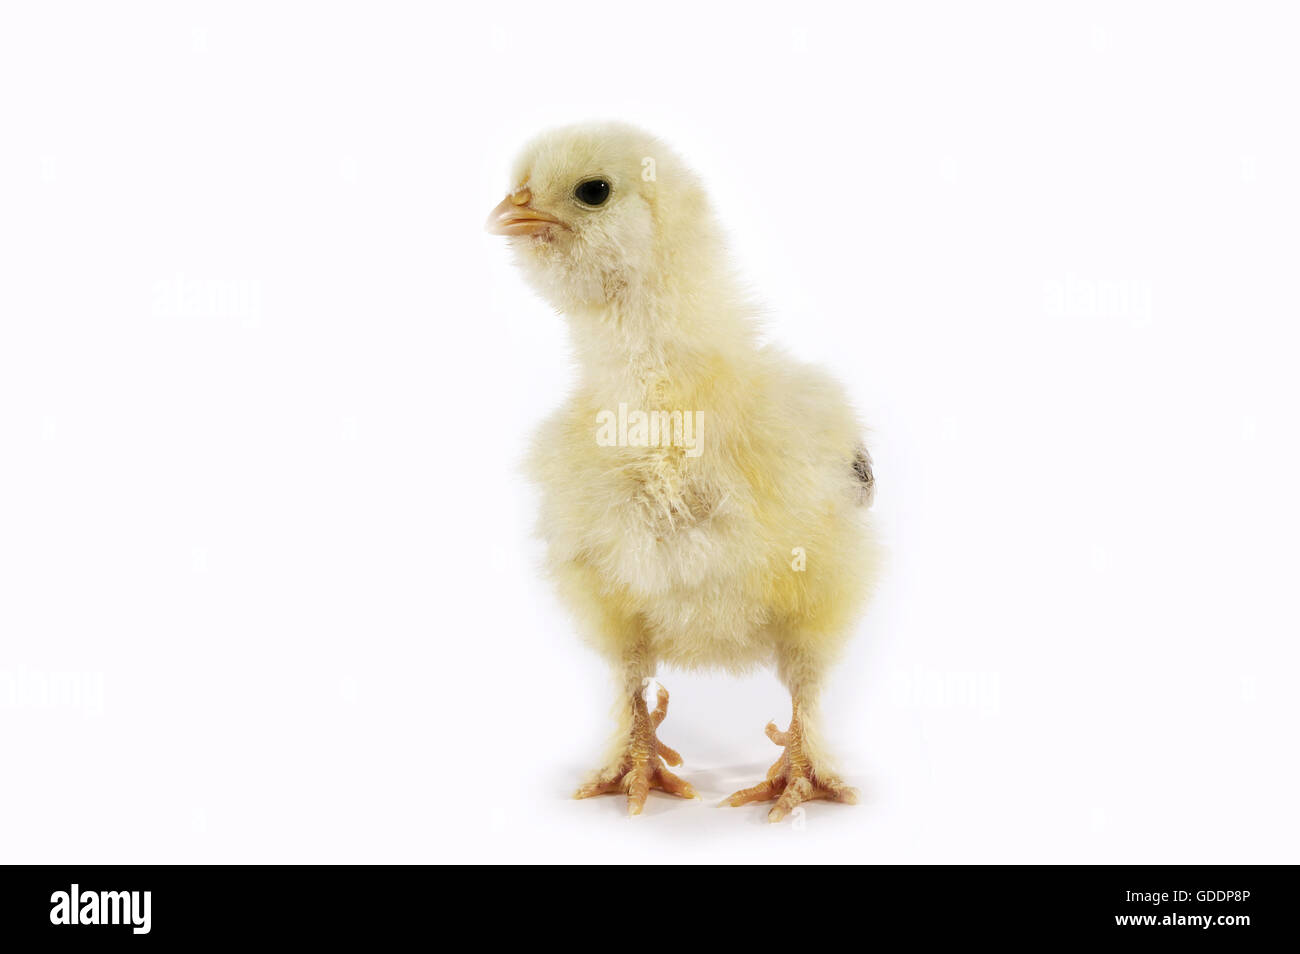 Chick against White Background Stock Photo